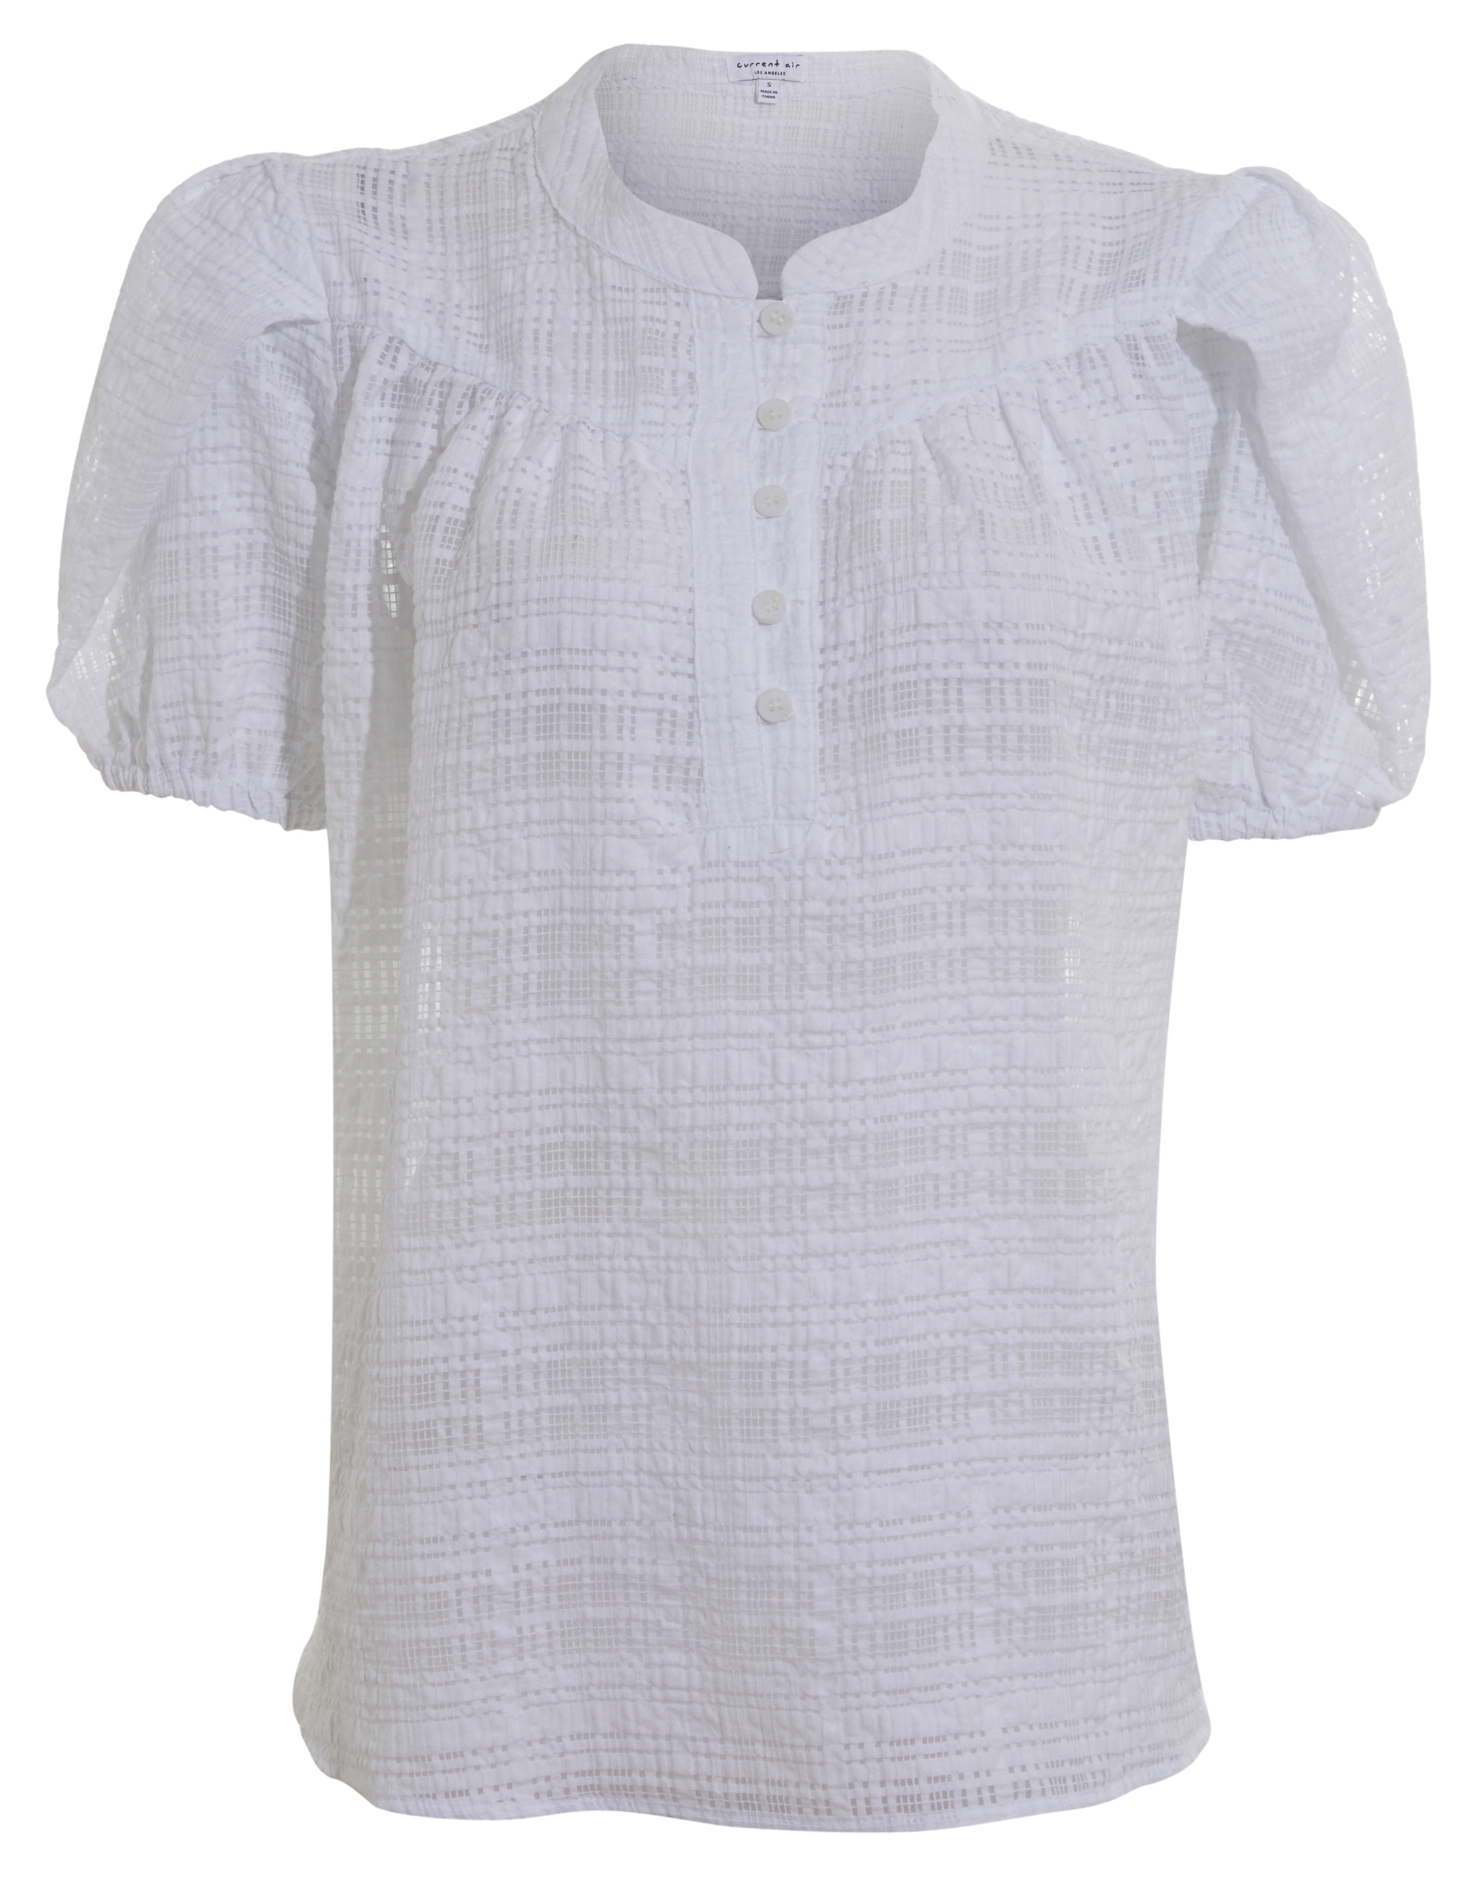 Current Air Short Sleeve Textured Blouse